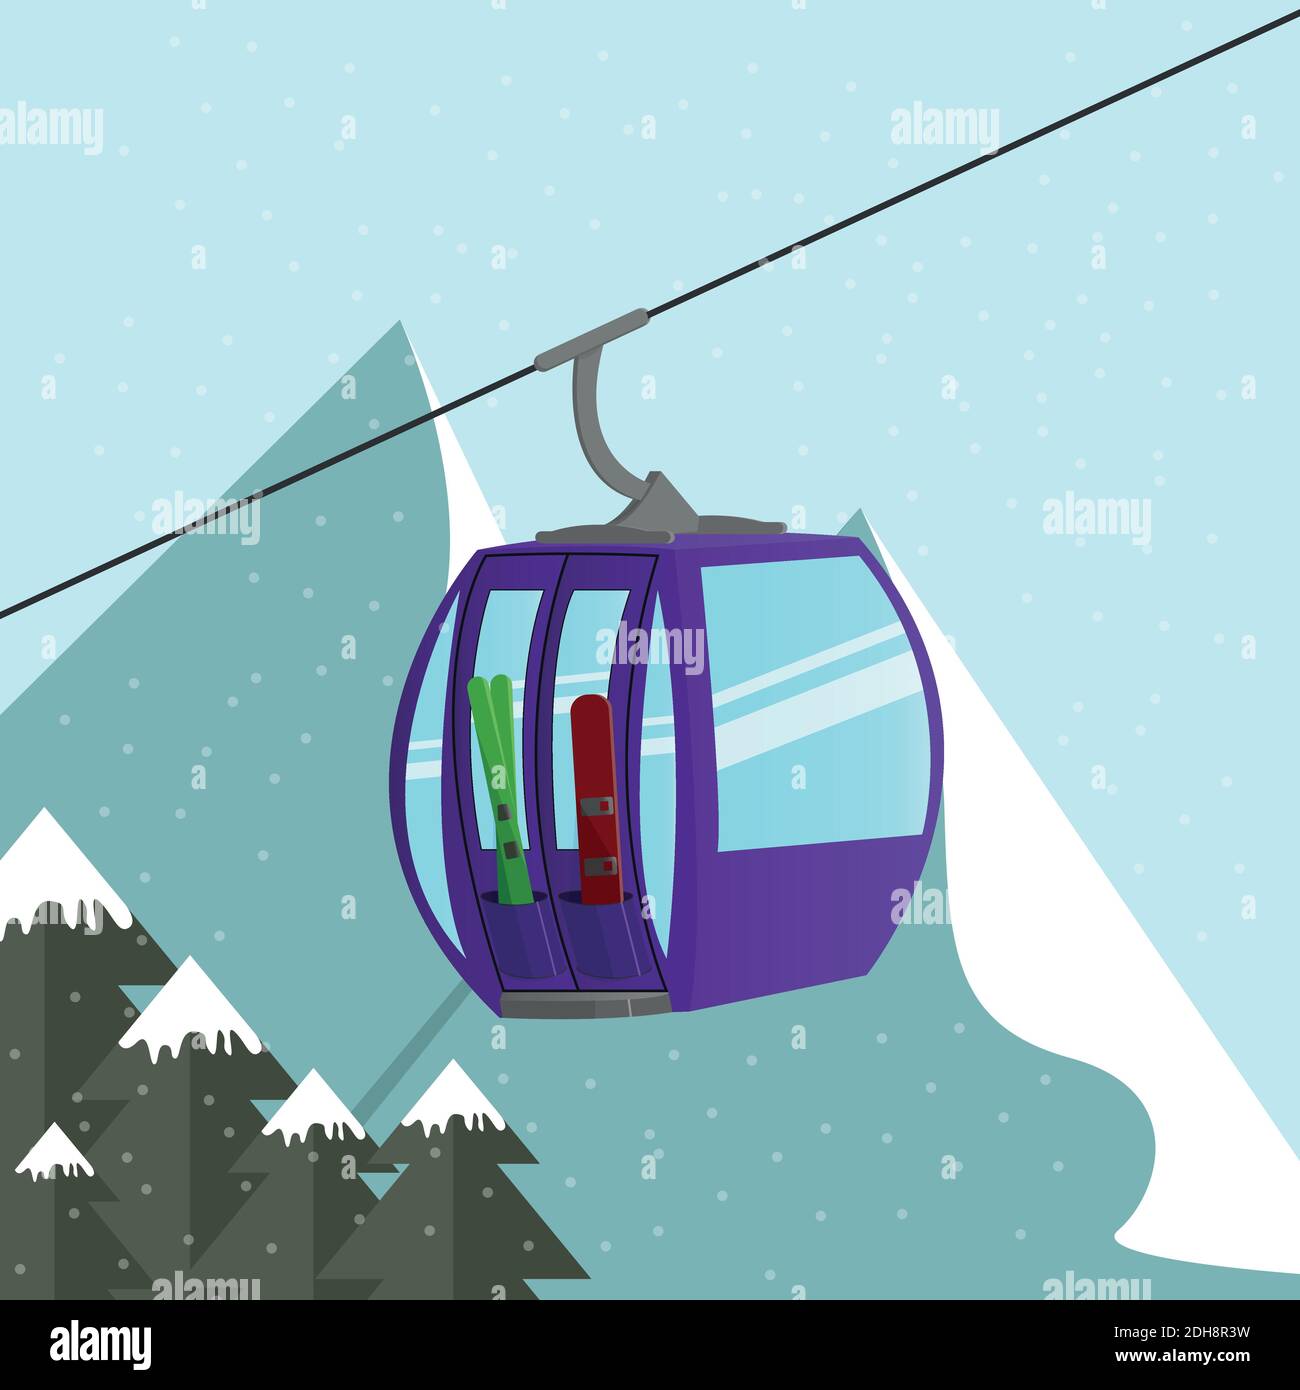 Alps ski lift gondola with skis and snowboard above the mountain's peak. Extreme tourist backgrounds and vector illustrations Stock Vector